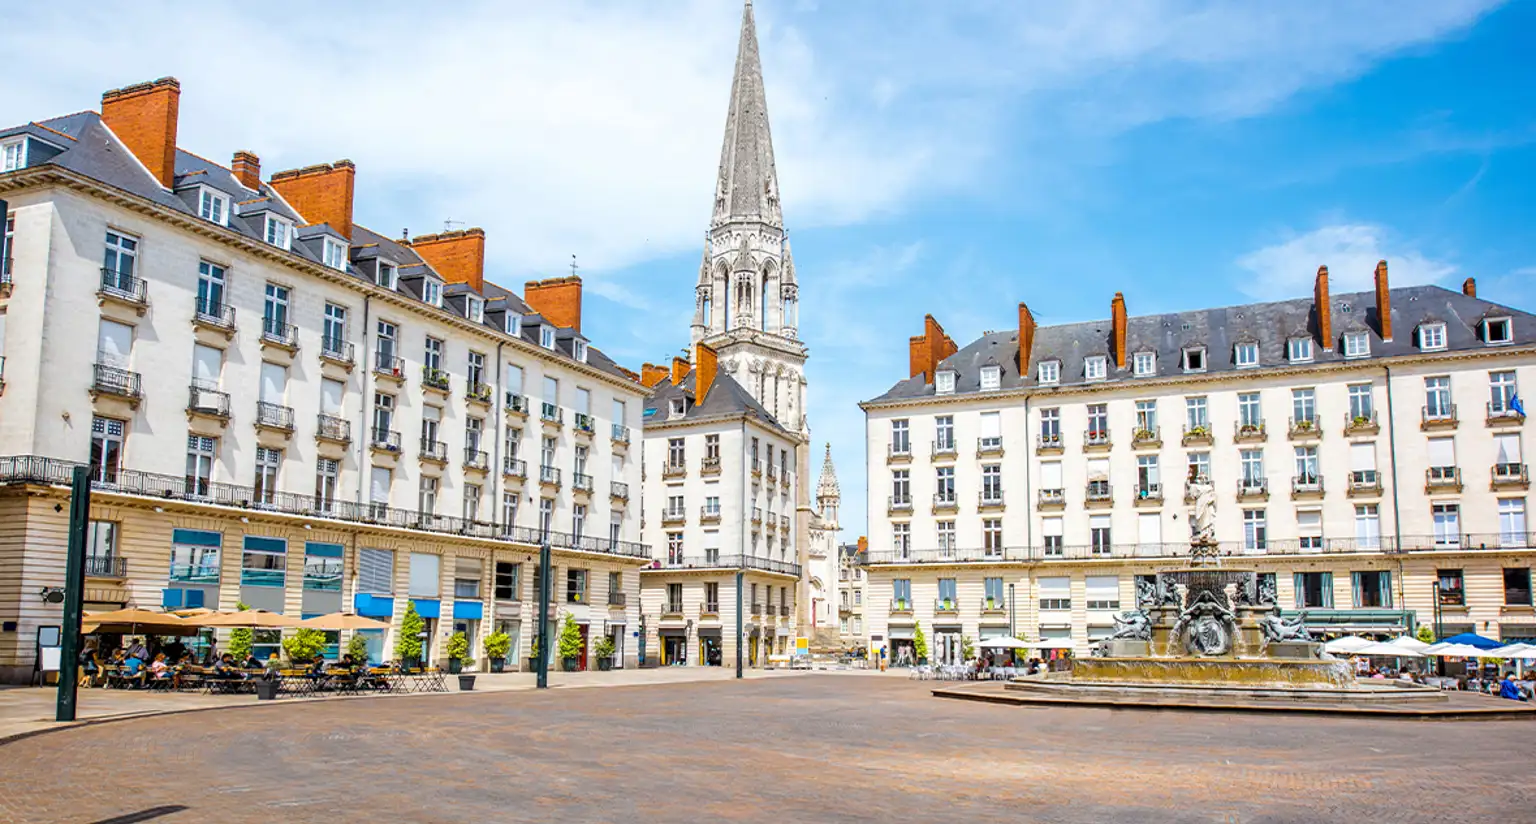 Things to do in Nantes